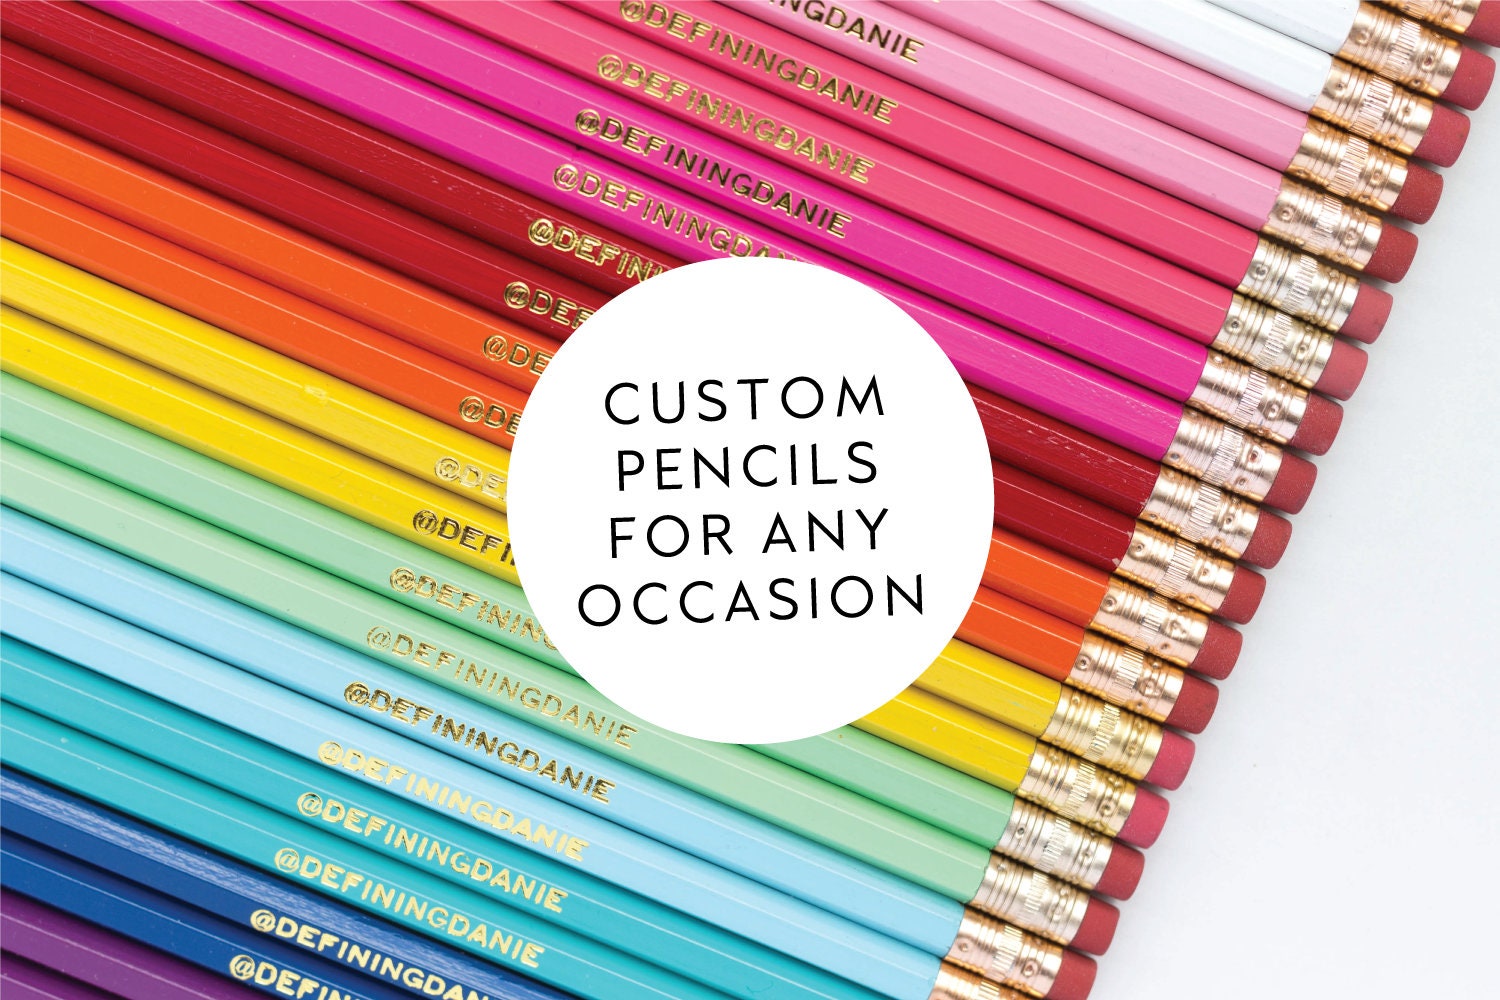 Infinity Pencil With Replacement Nib School Supplies Stationery Gift Stationery  Supplies Kawaii Stationery Office Supplies 